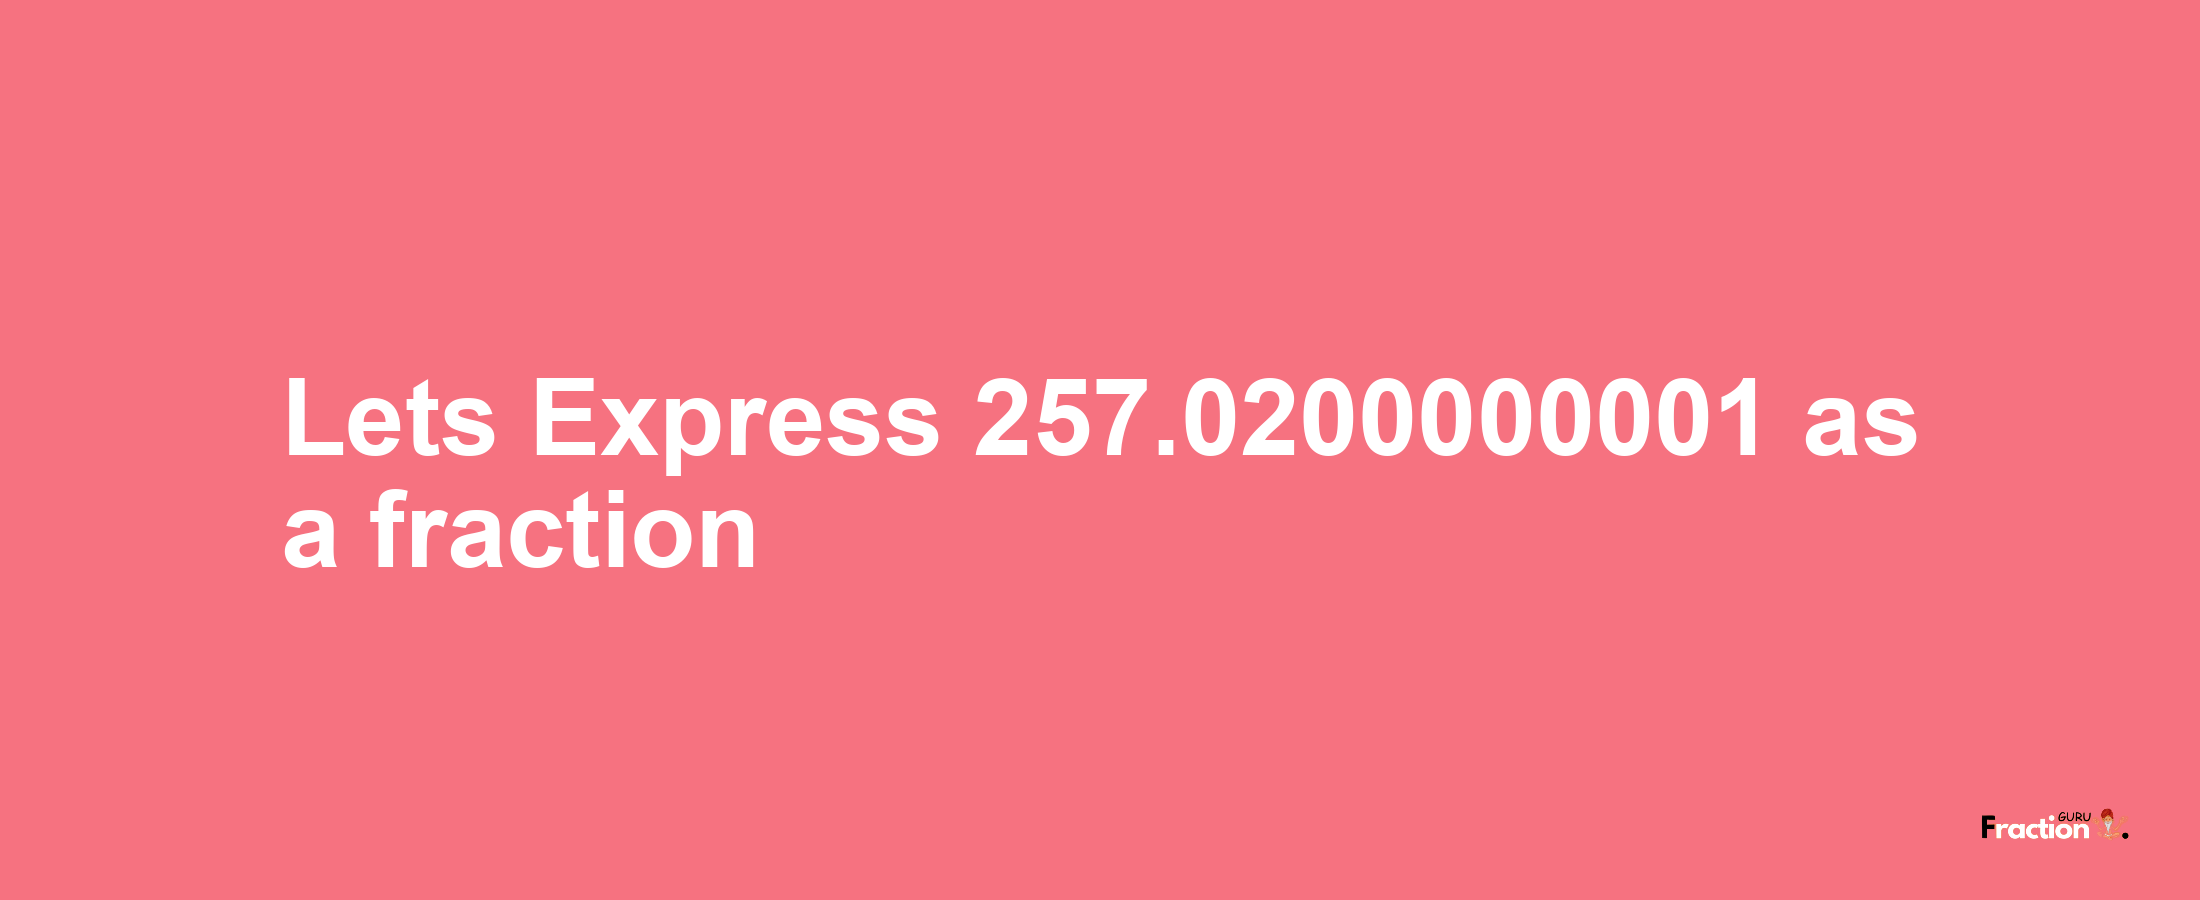 Lets Express 257.0200000001 as afraction